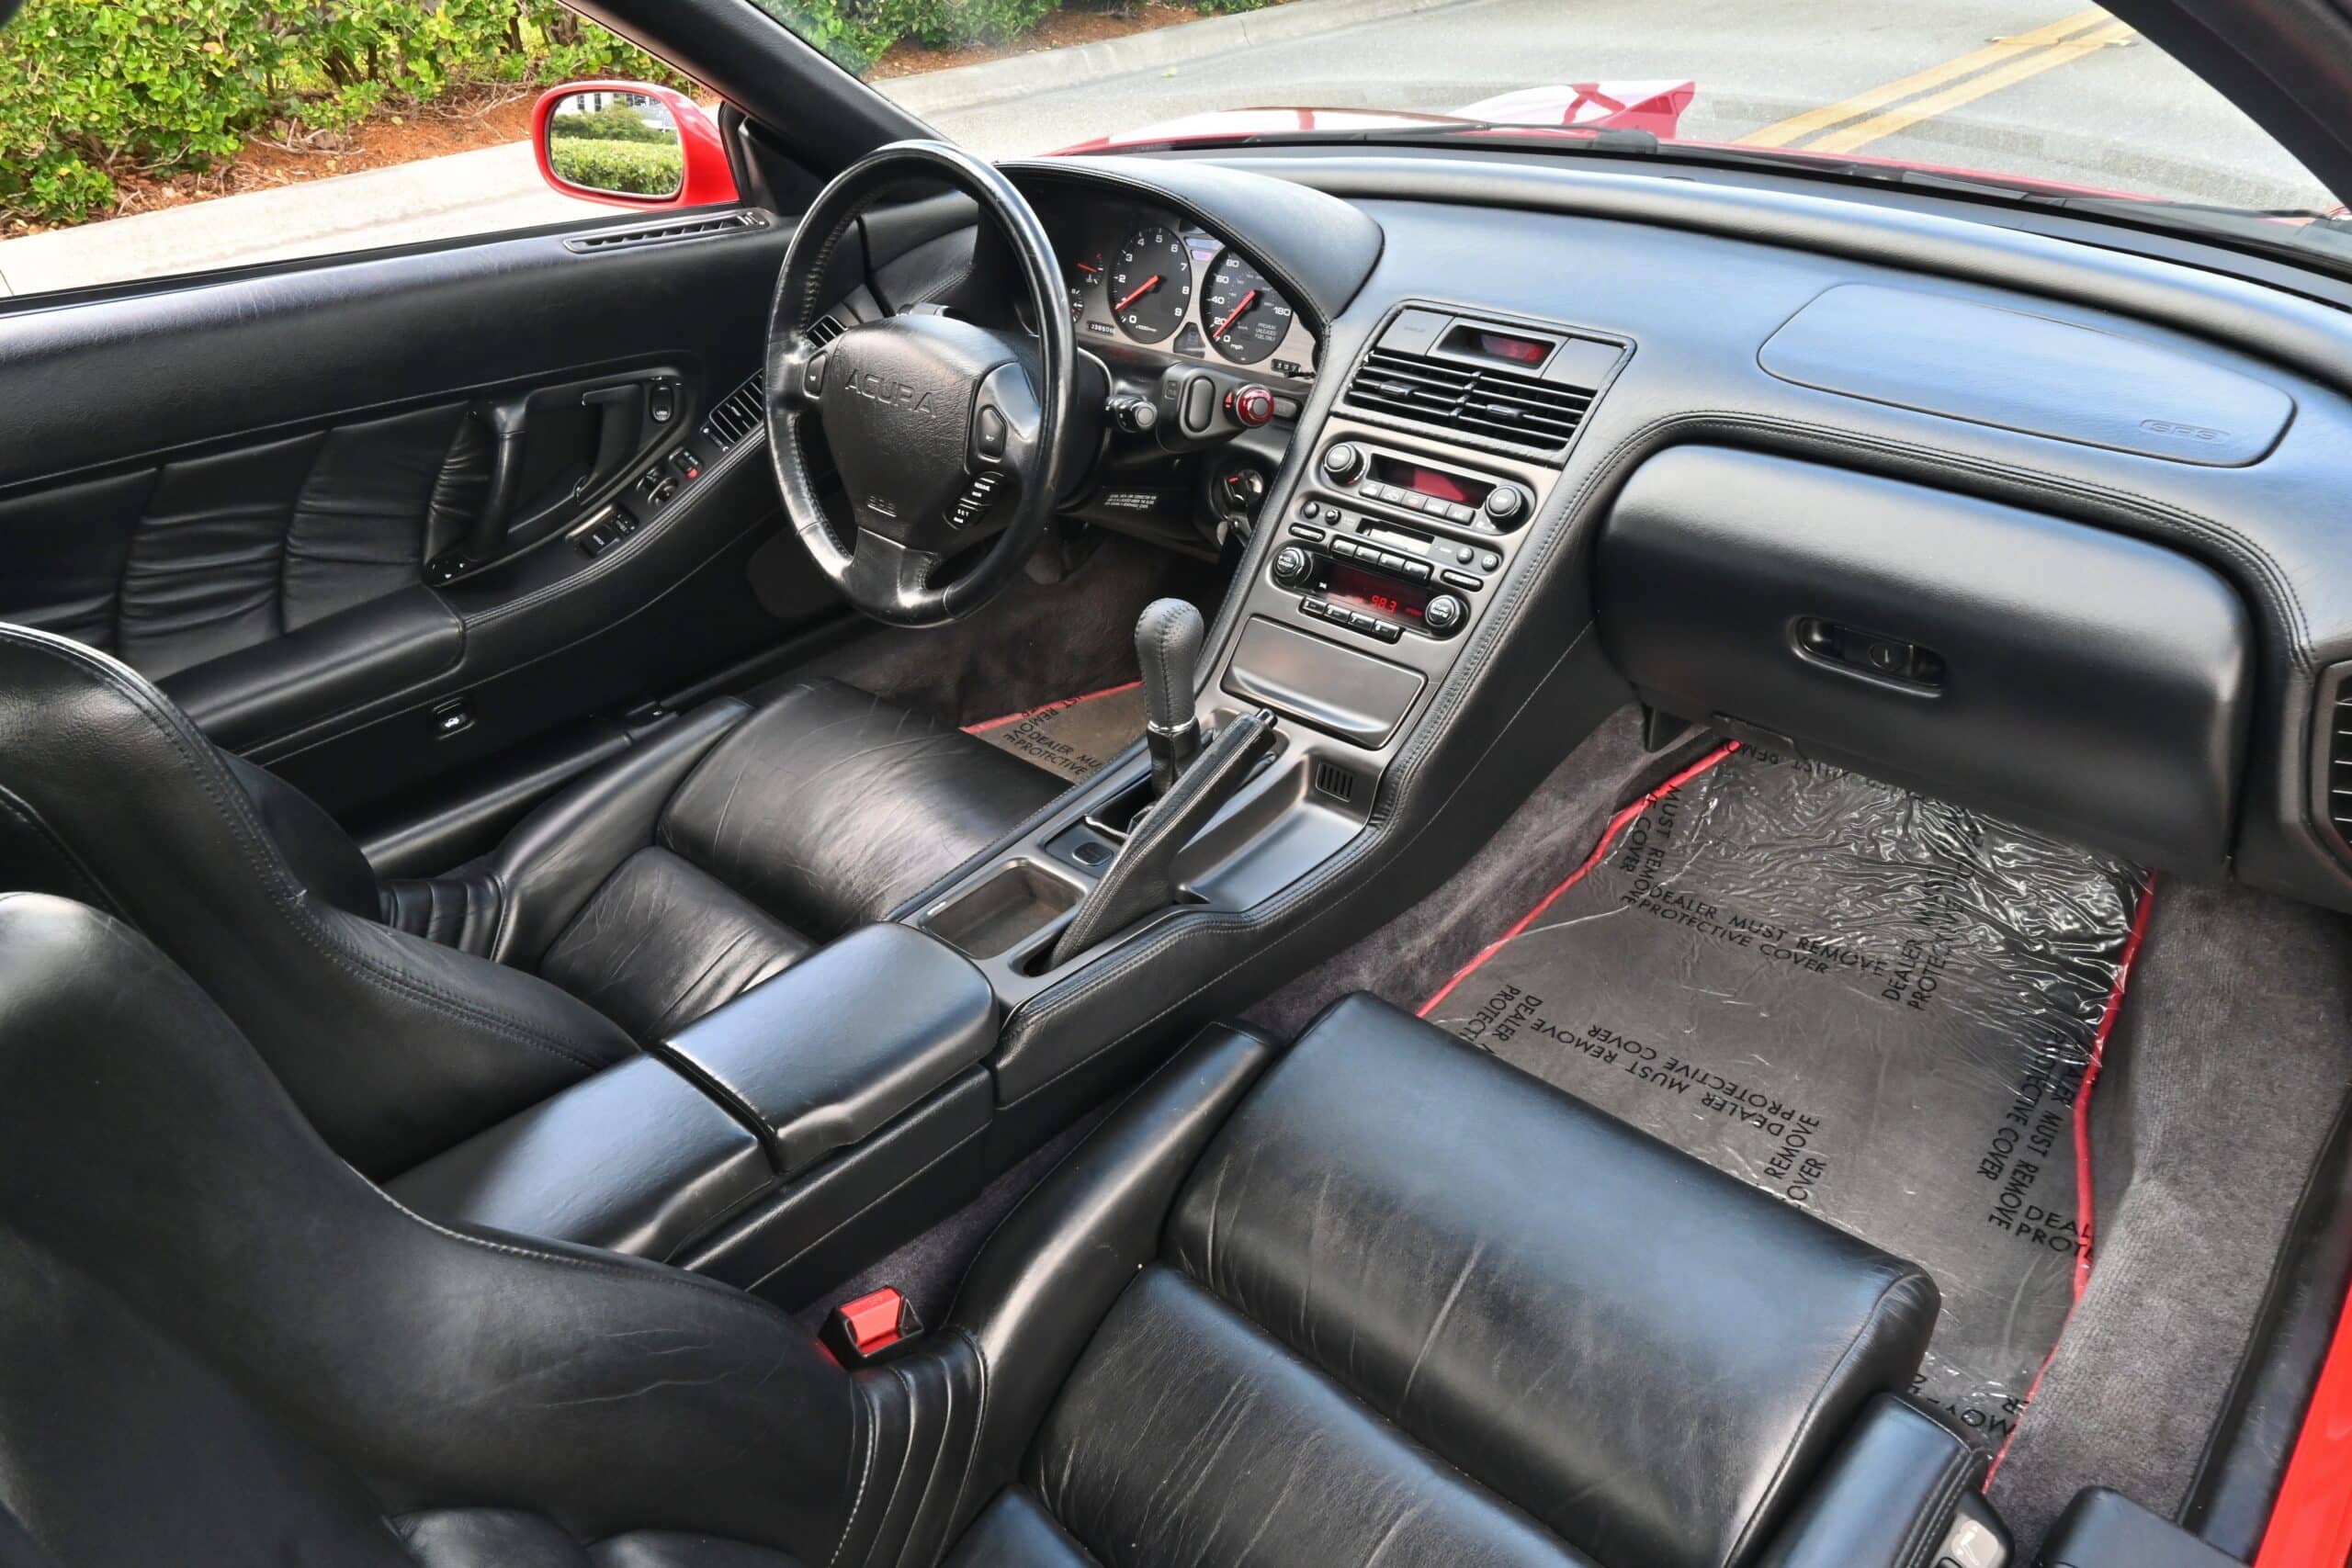 1996 Acura NSX-T Like New and original with ONLY 36k MILES – 5 Speed Manual – Timing belt done